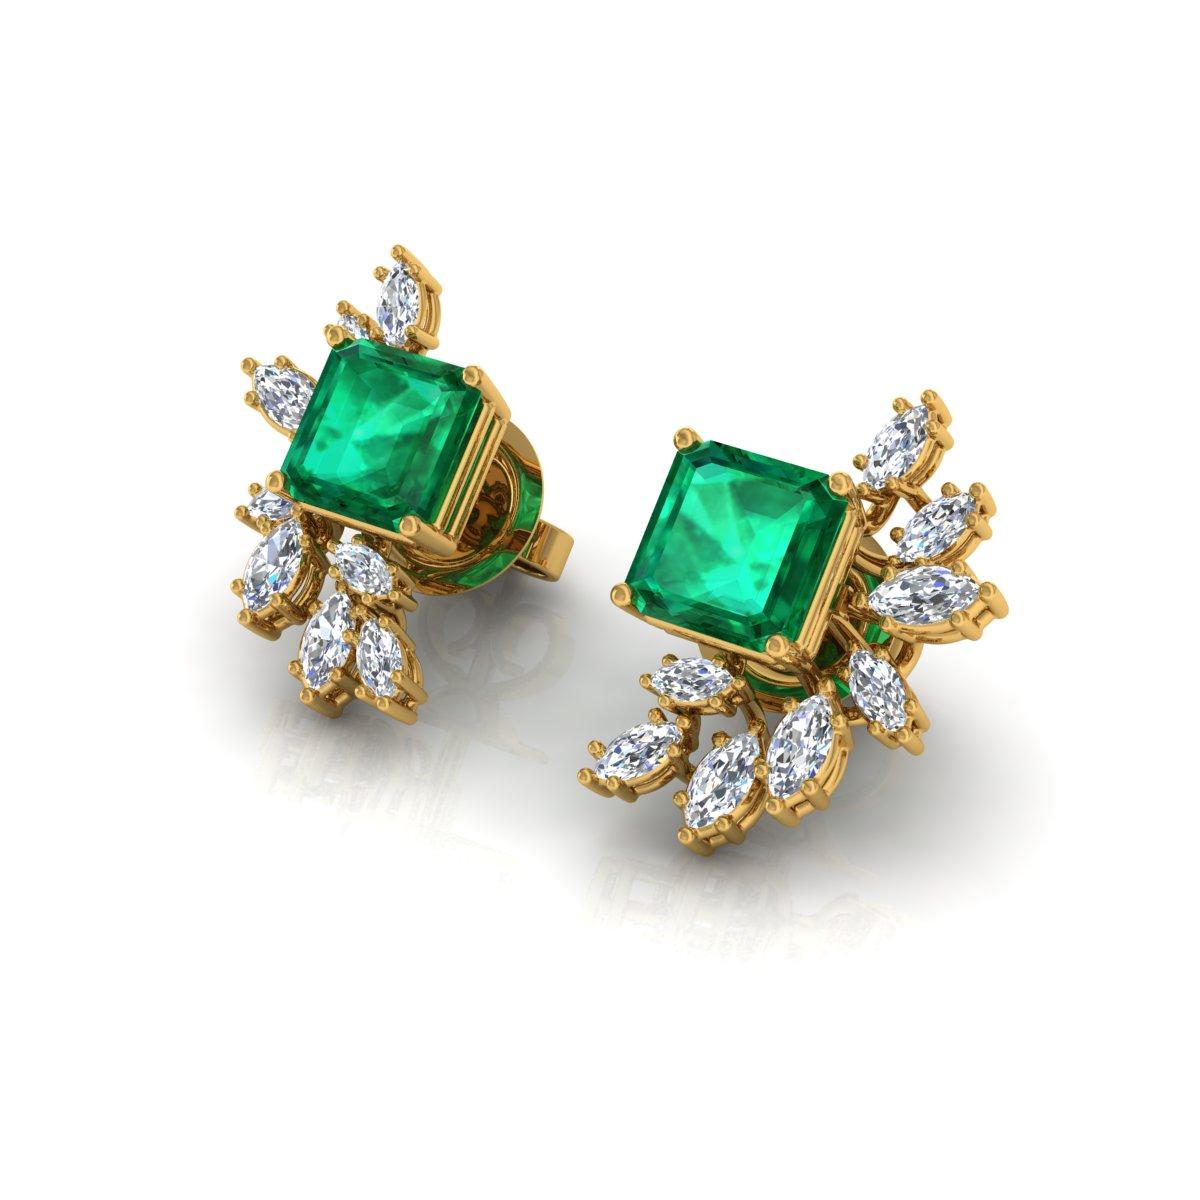 Item Code :- SEE-1676
Gross Wt. :- 3.96 gm
18k Solid Yellow Gold Wt. :- 3.48 gm
Natural Diamond Wt. :- 1.00 Ct.  ( AVERAGE DIAMOND CLARITY SI1-SI2 & COLOR H-I )
Emerald Wt. :- 1.40 Ct. 
Earrings Size :- 16.5 mm approx.

✦